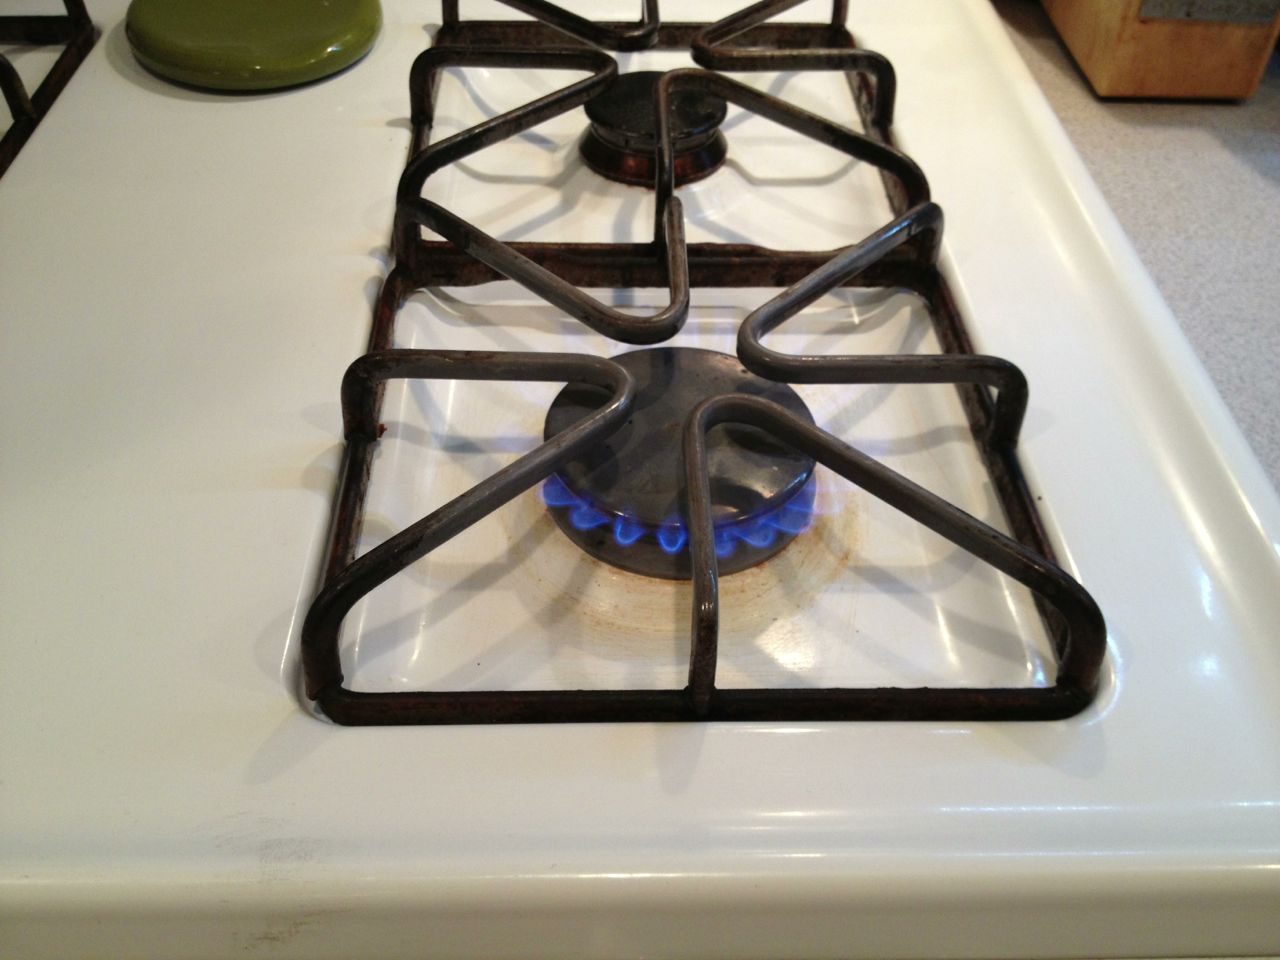 Minimalist Gas Stove Burner Not Working for Large Space